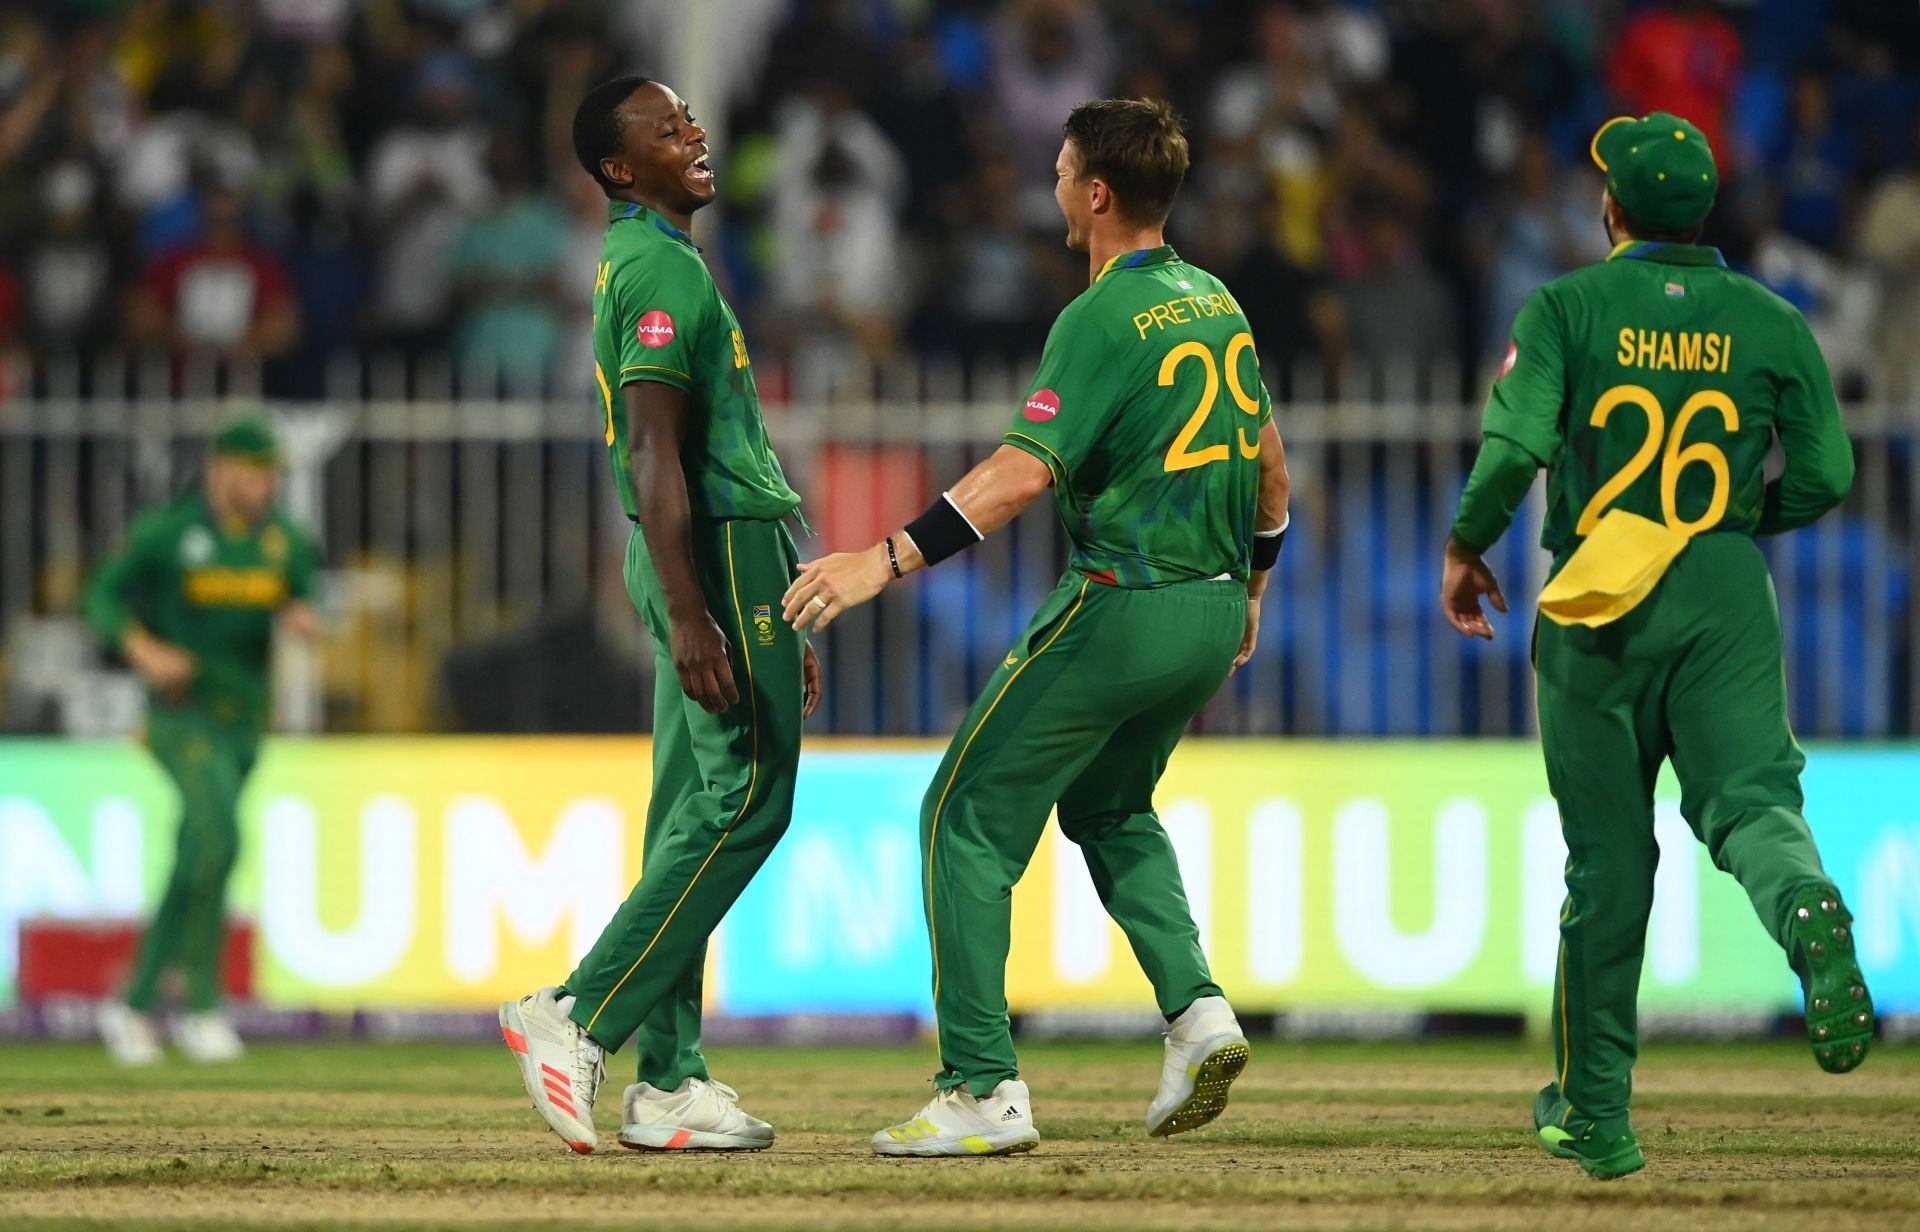 South Africa won four of their five games in the T20 World Cup 2021